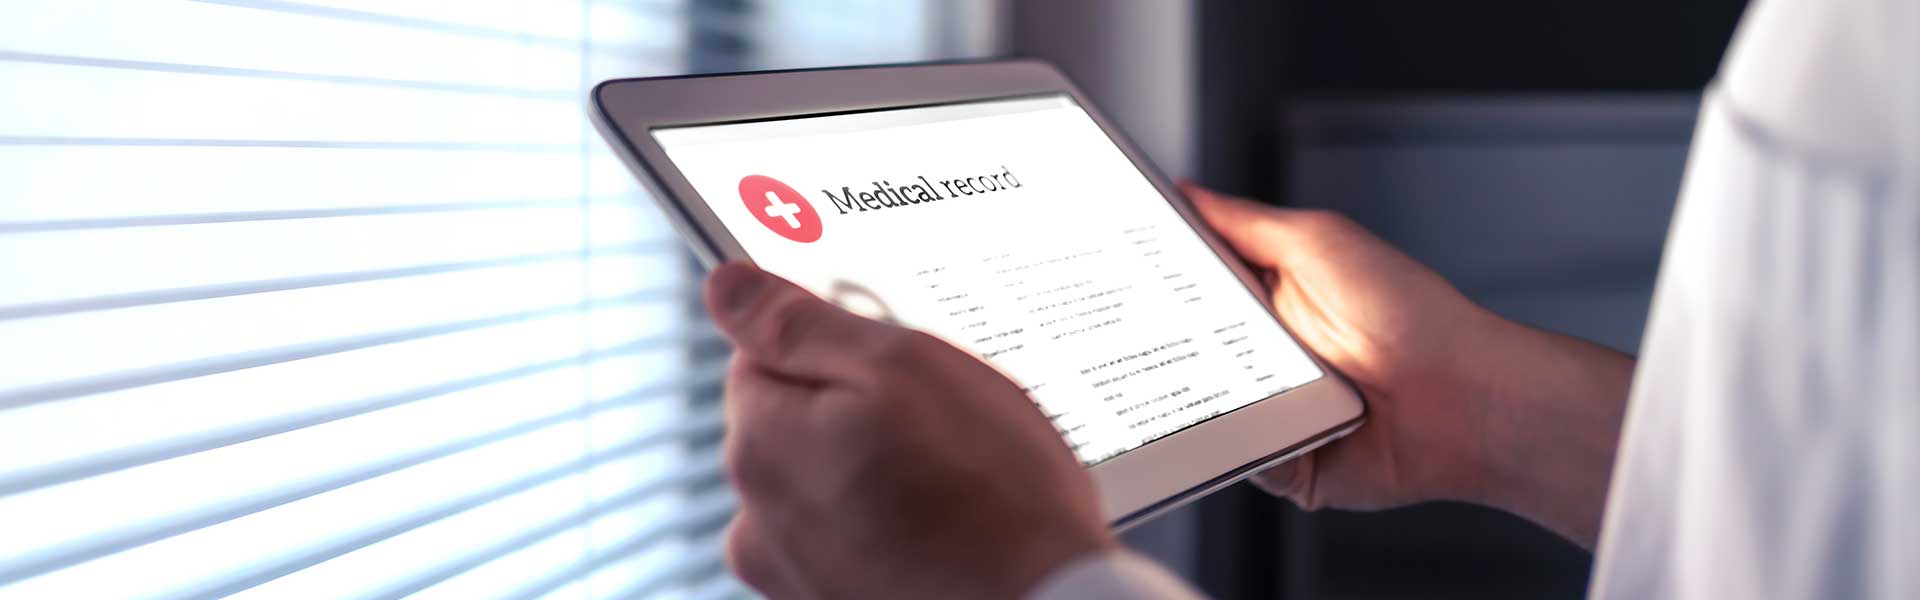 physician-viewing-medical-records-on-tablet